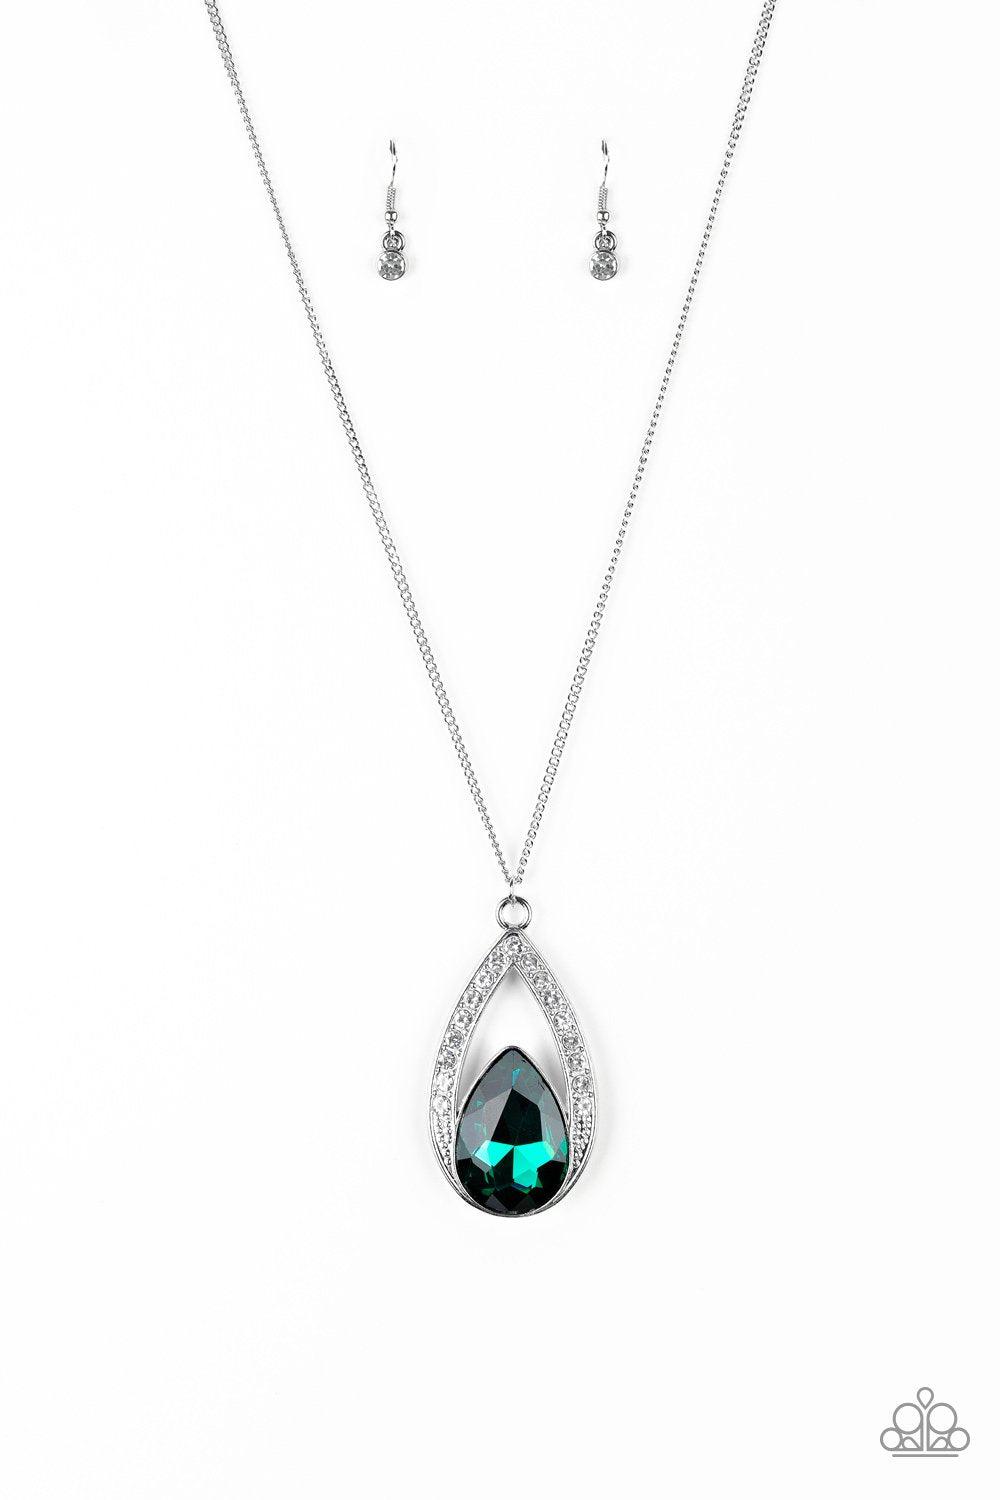 Notorious Noble Green Gem Pendant Necklace - Paparazzi Accessories-CarasShop.com - $5 Jewelry by Cara Jewels